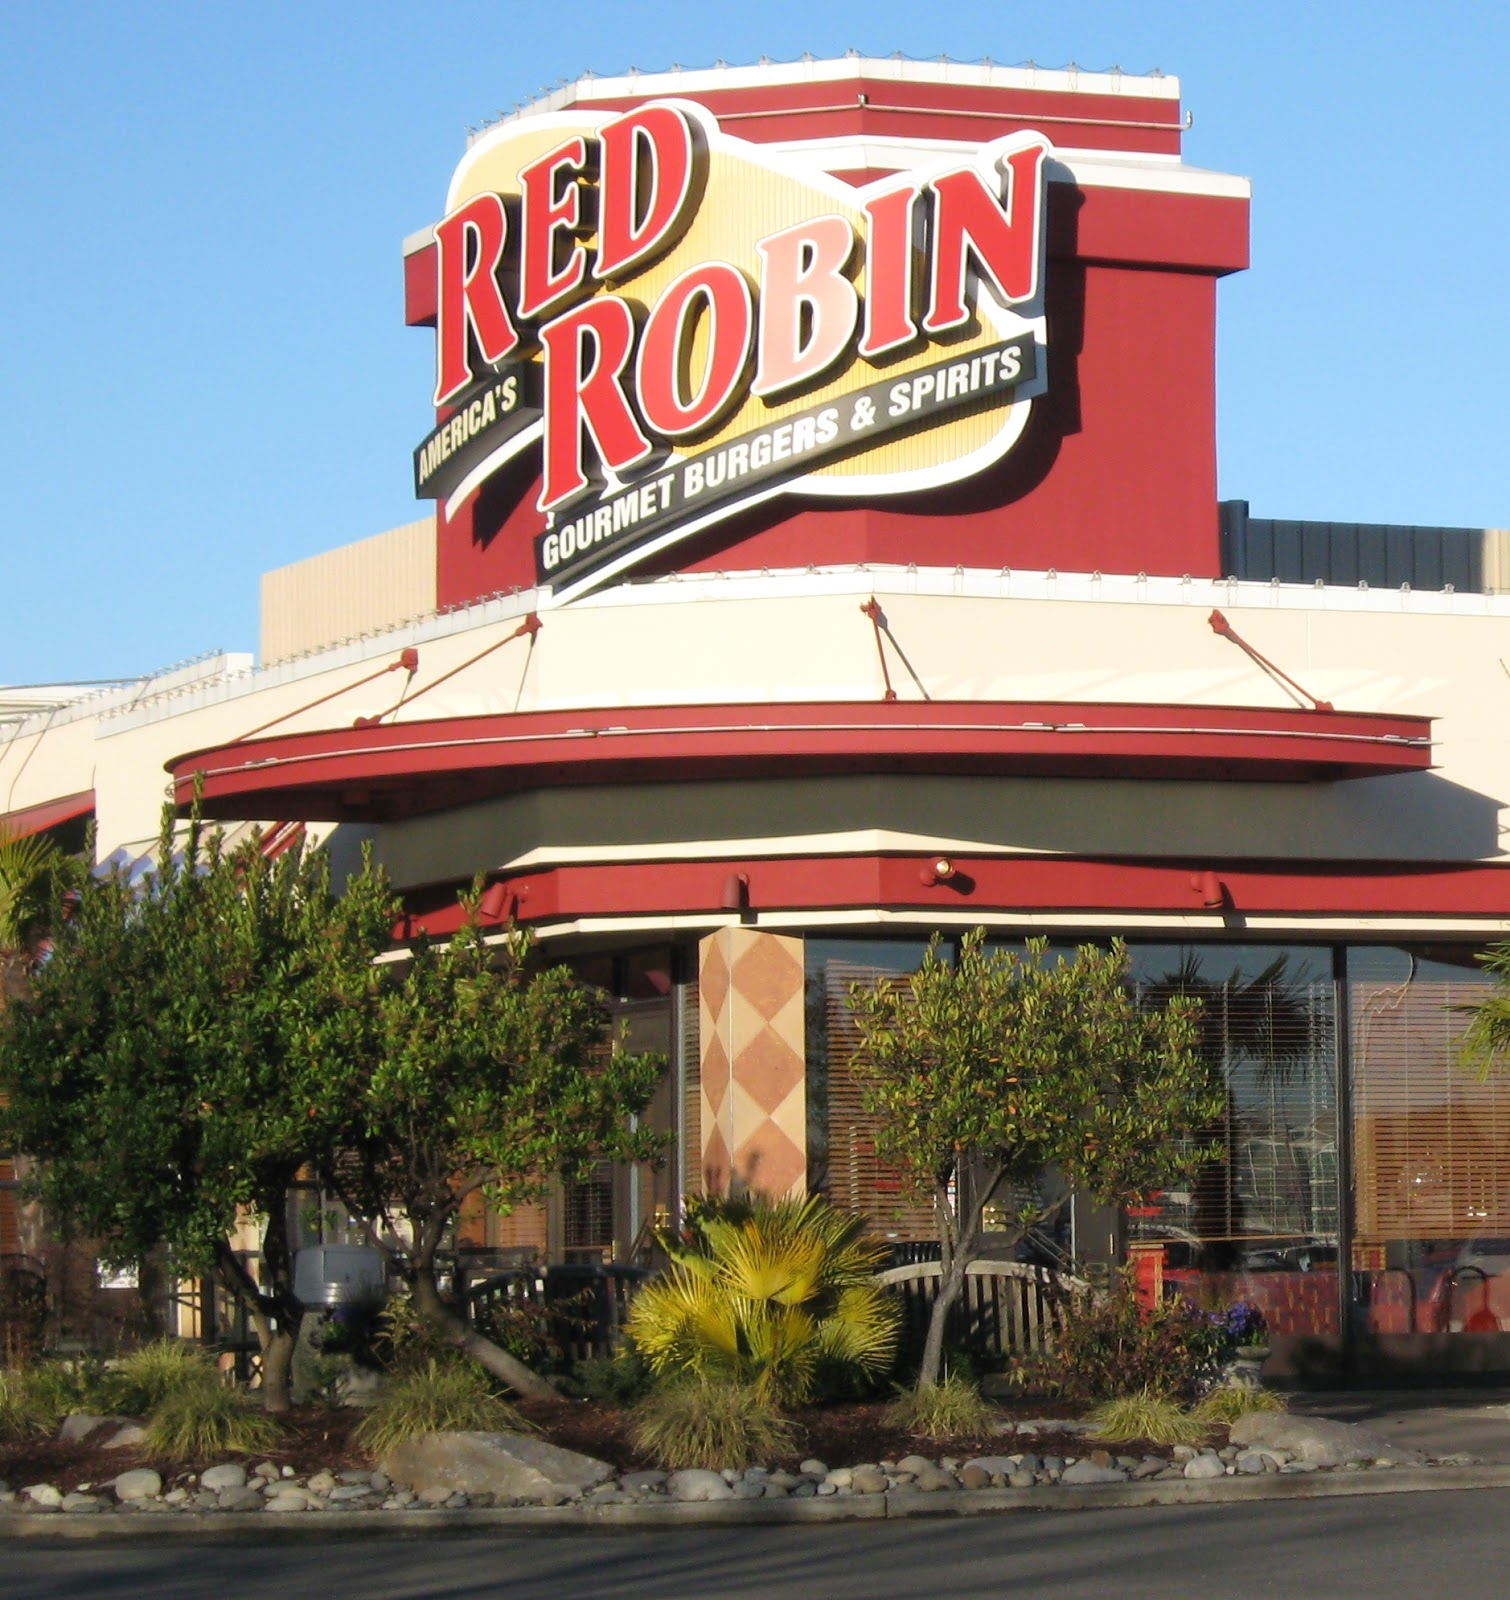 Red Robin Coupons - Printable Coupons 2019 - Free Red Robin Coupons Printable